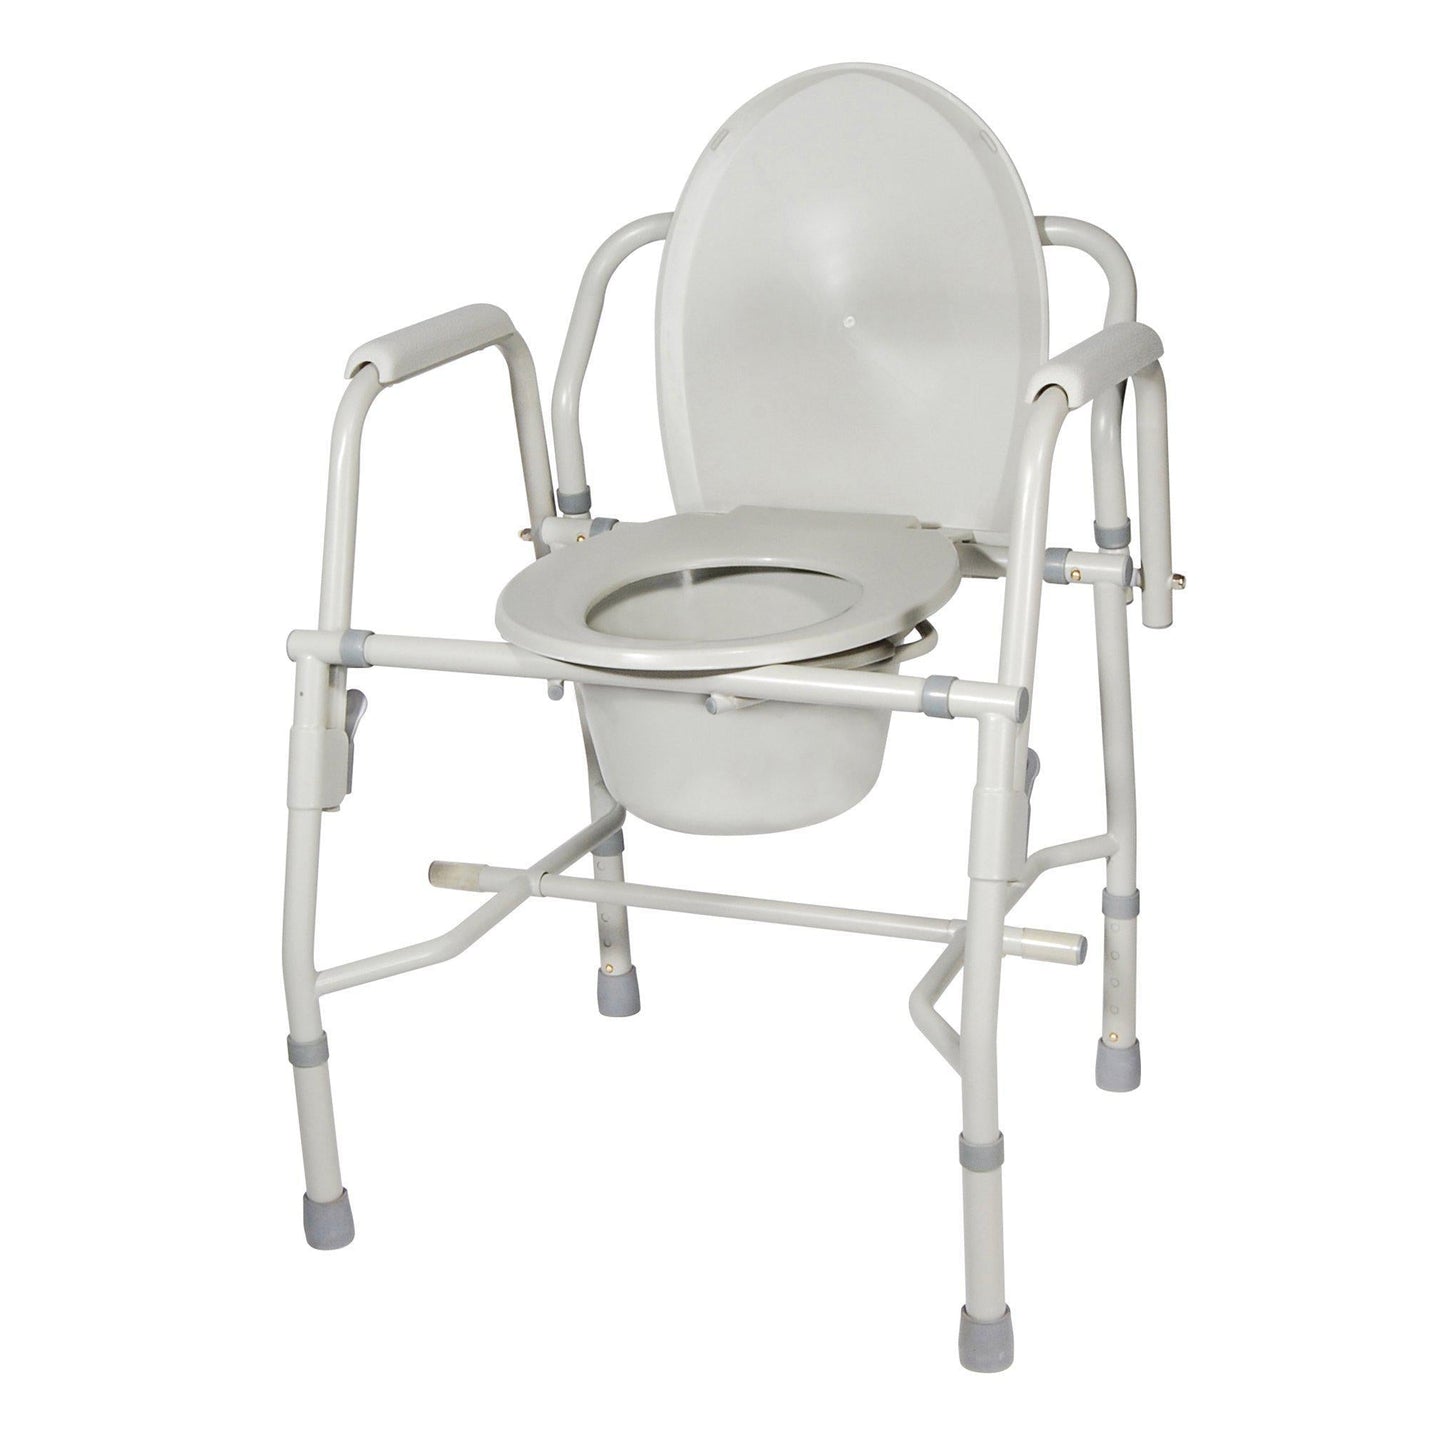 Deluxe Drop-Arm Commode